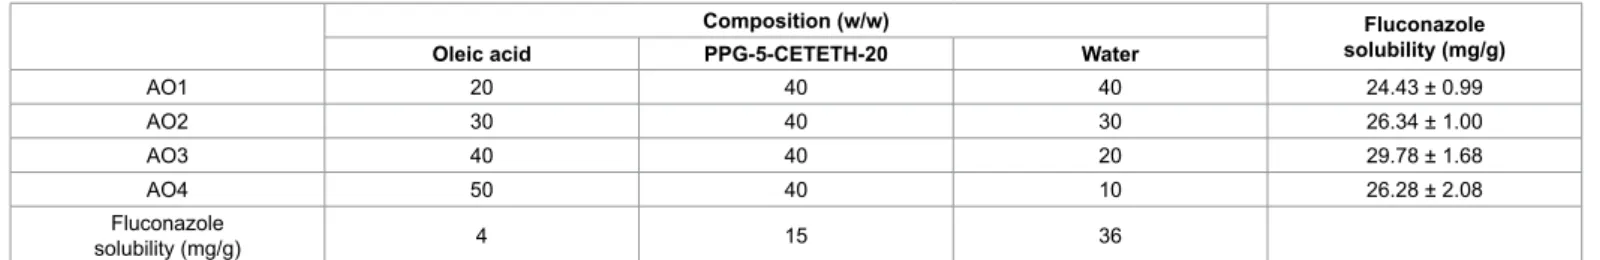 Table 1: Composition, phase behaviour, and luconazole solubility of the studied formulations.